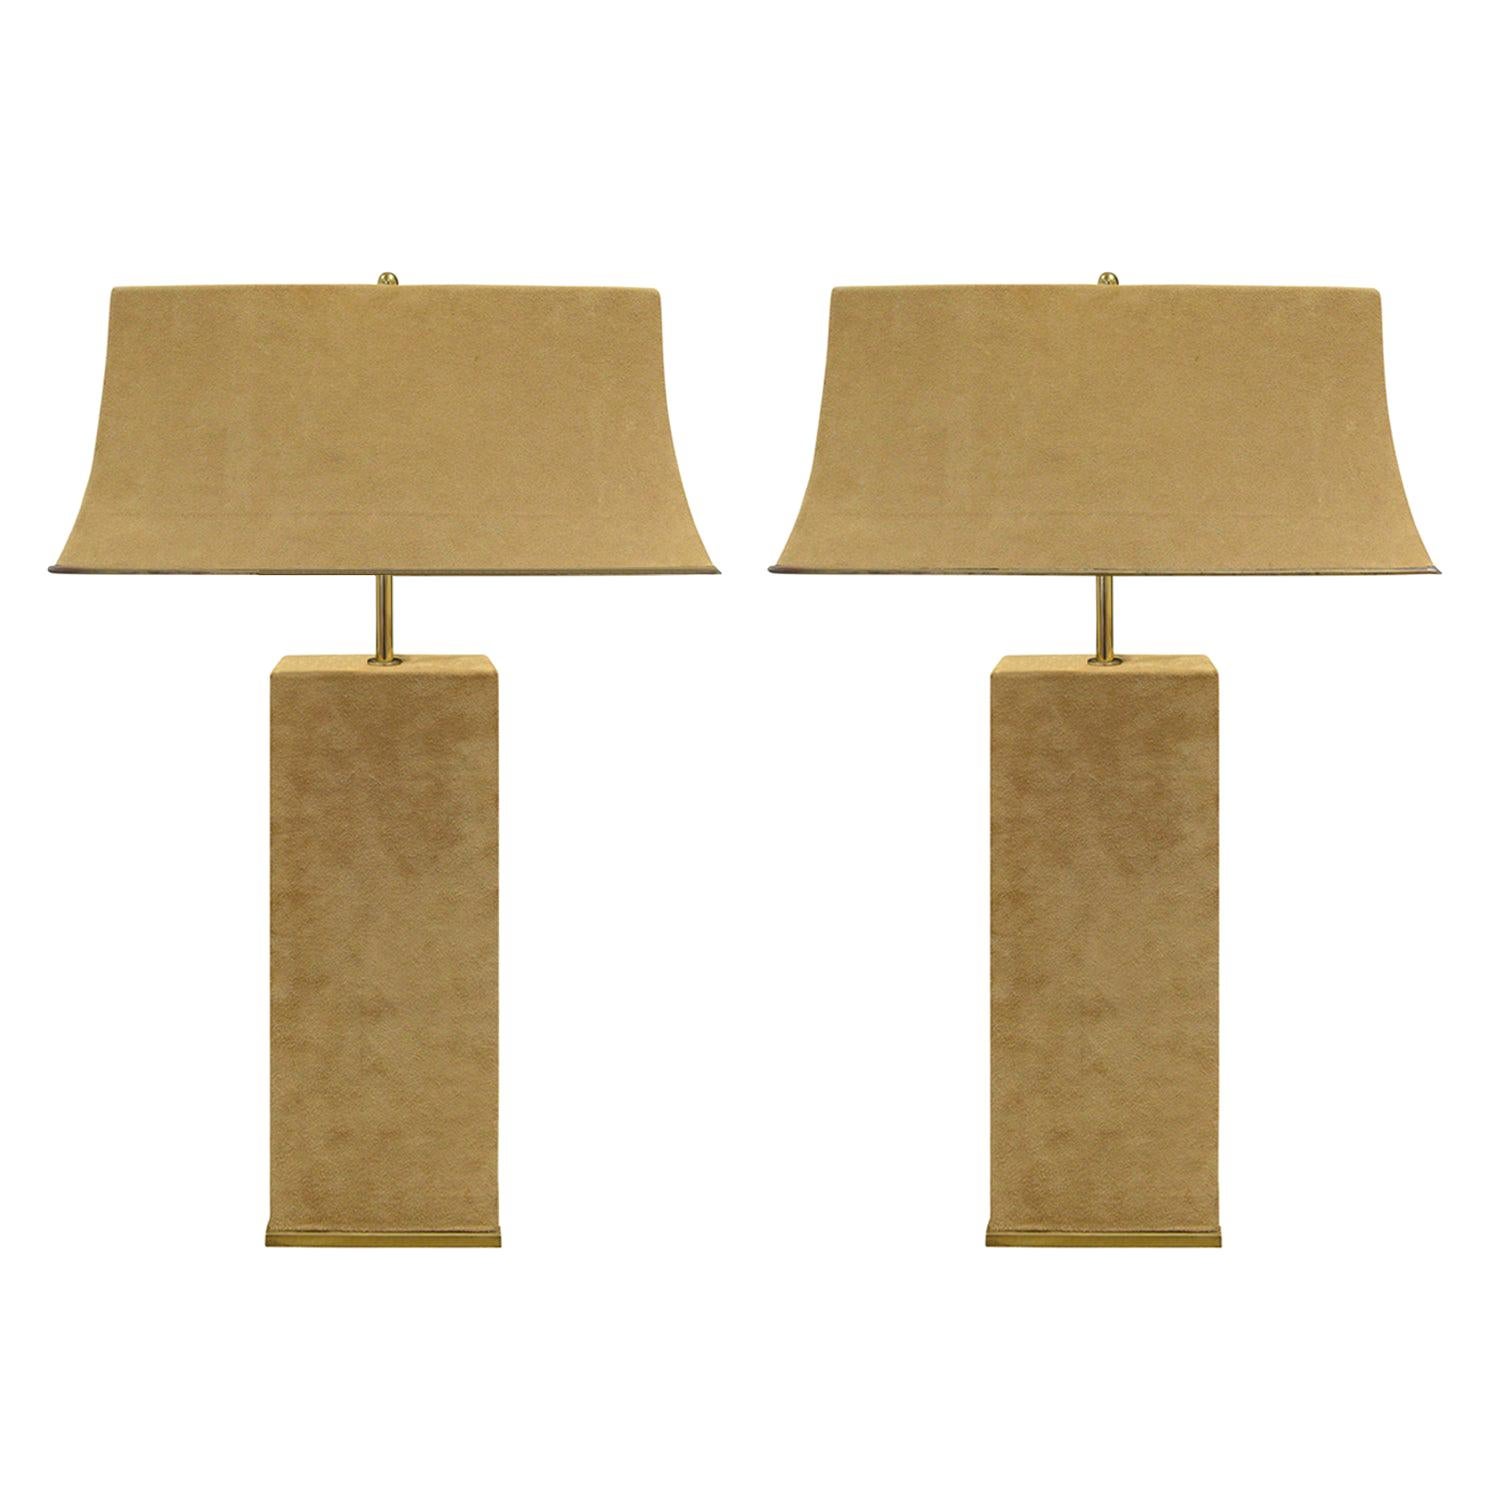 Karl Springer Elegant Pair of Table Lamps in Brass and Beige Suede, 1970s